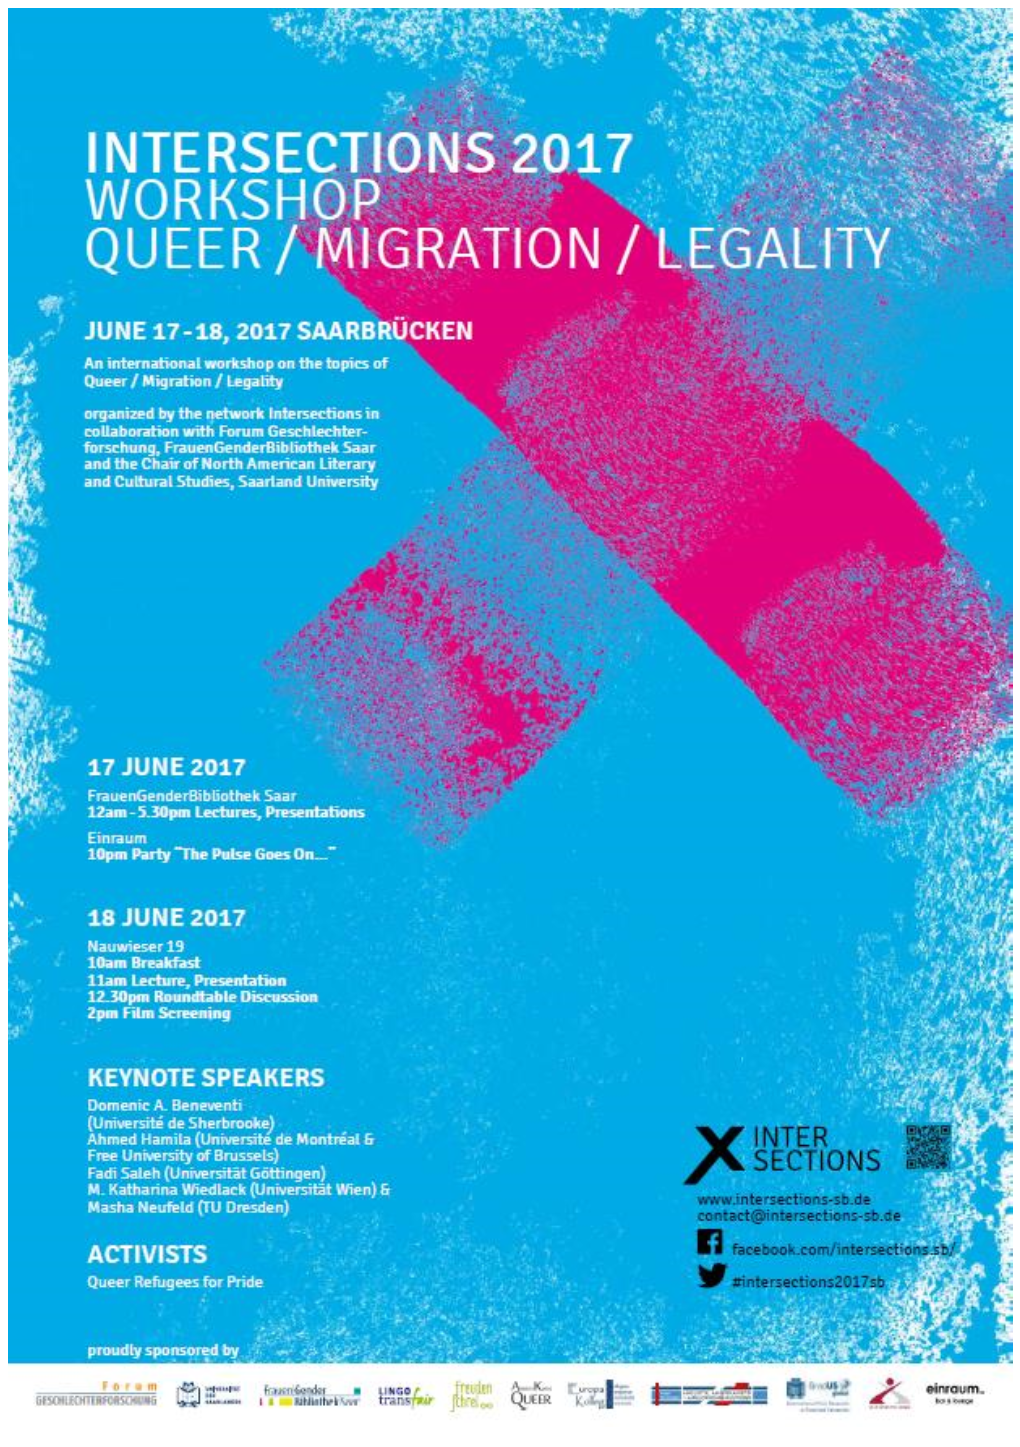 Queer Refugees for Pride